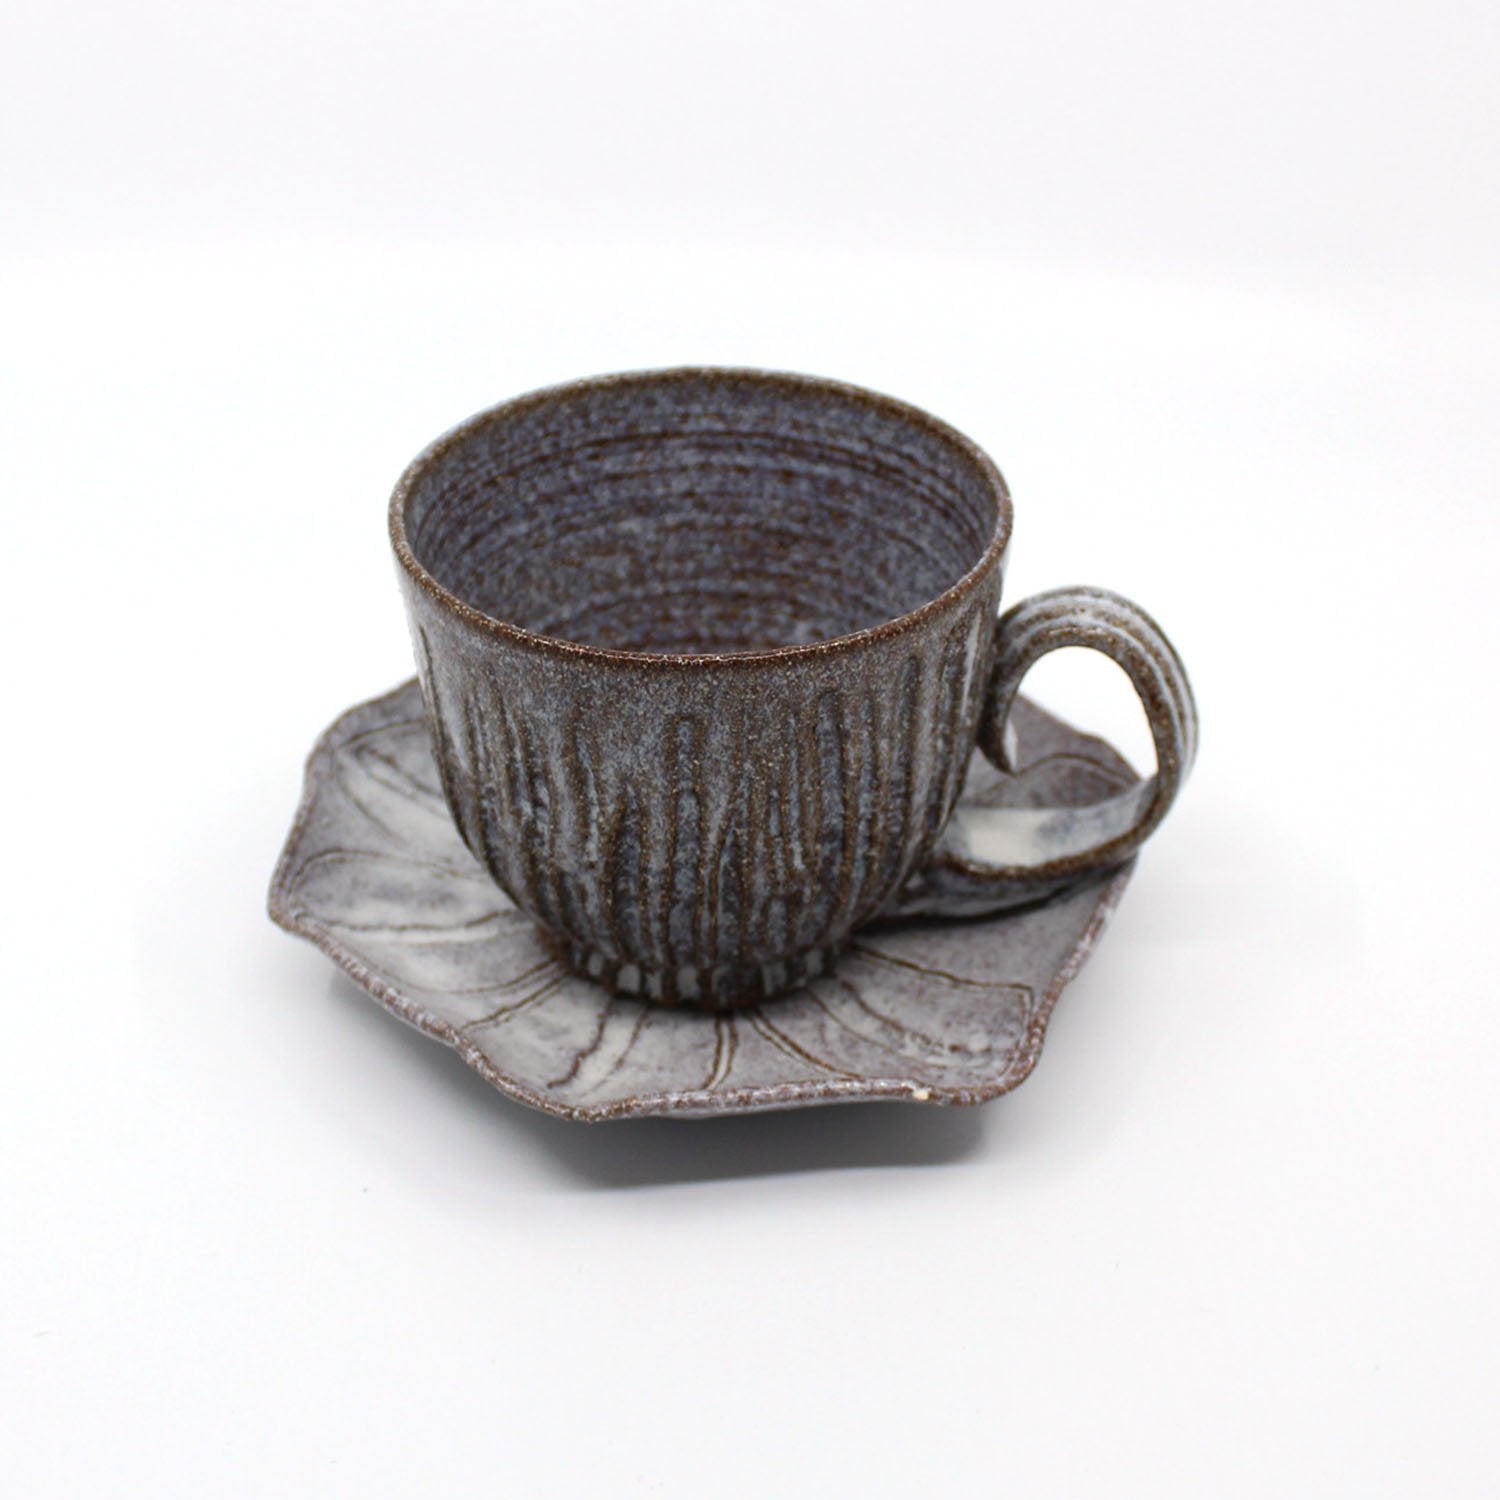 Ceramic Poppy Seed Head and Saucer